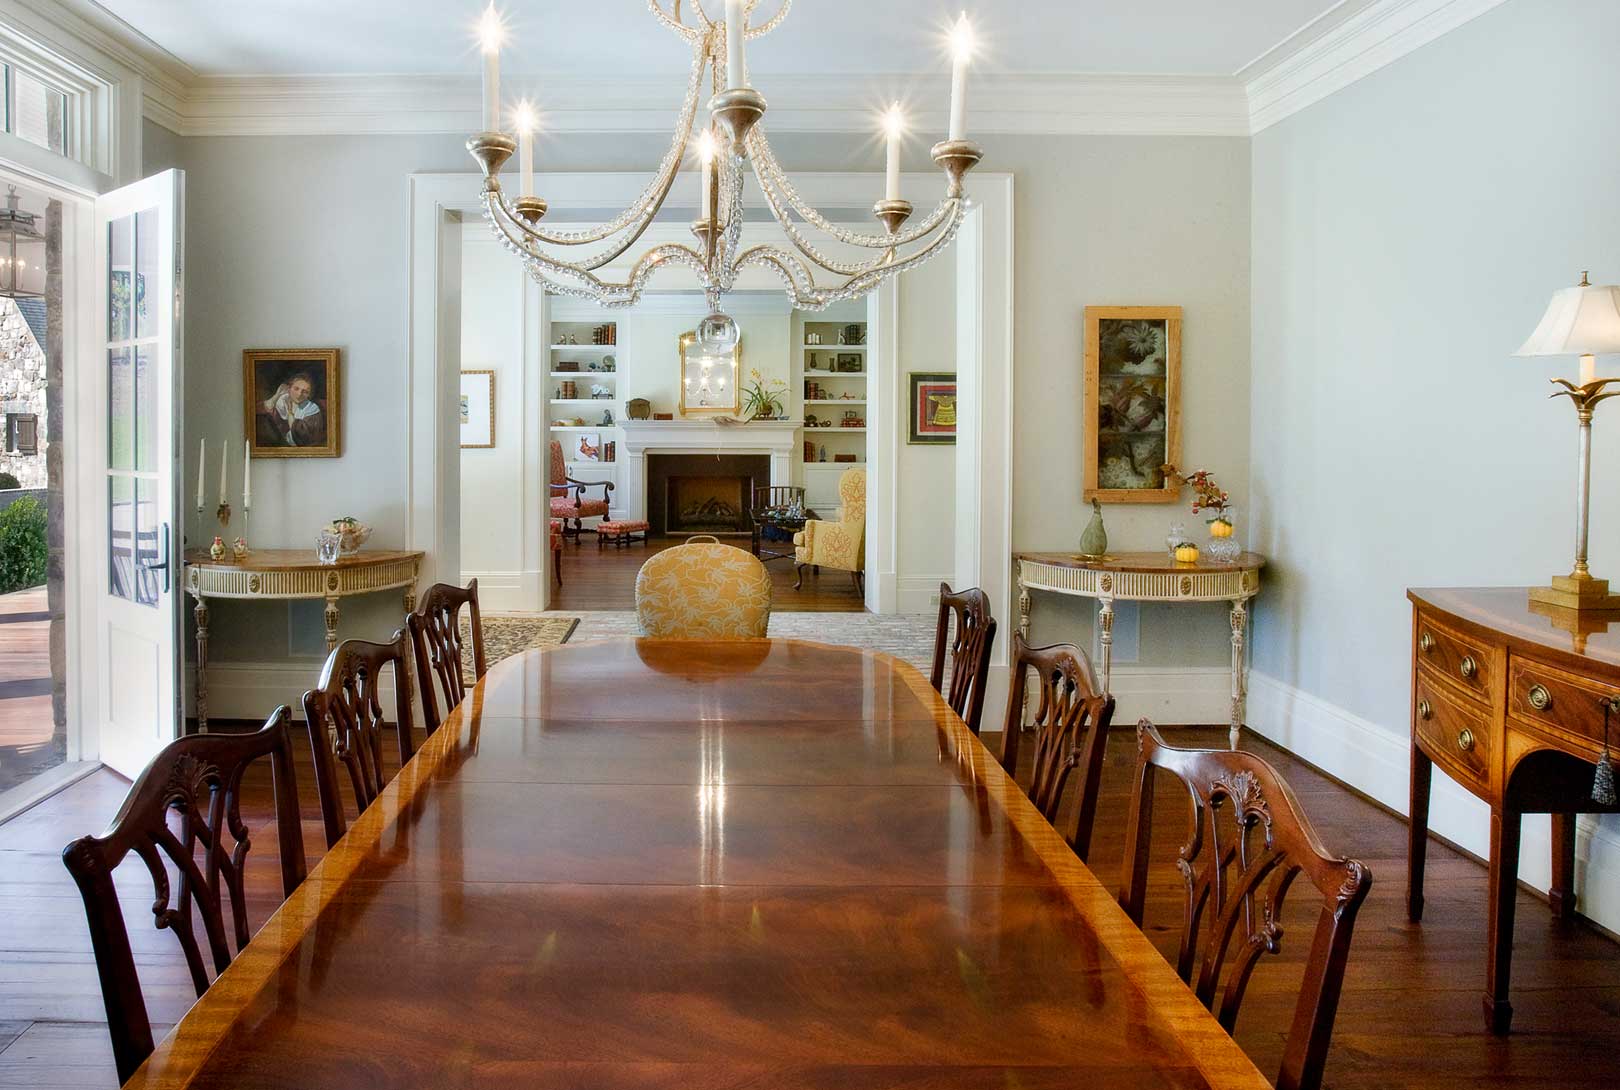 formal dining room with an antique dining room table, chandelier, and fireplace in the distant foyer